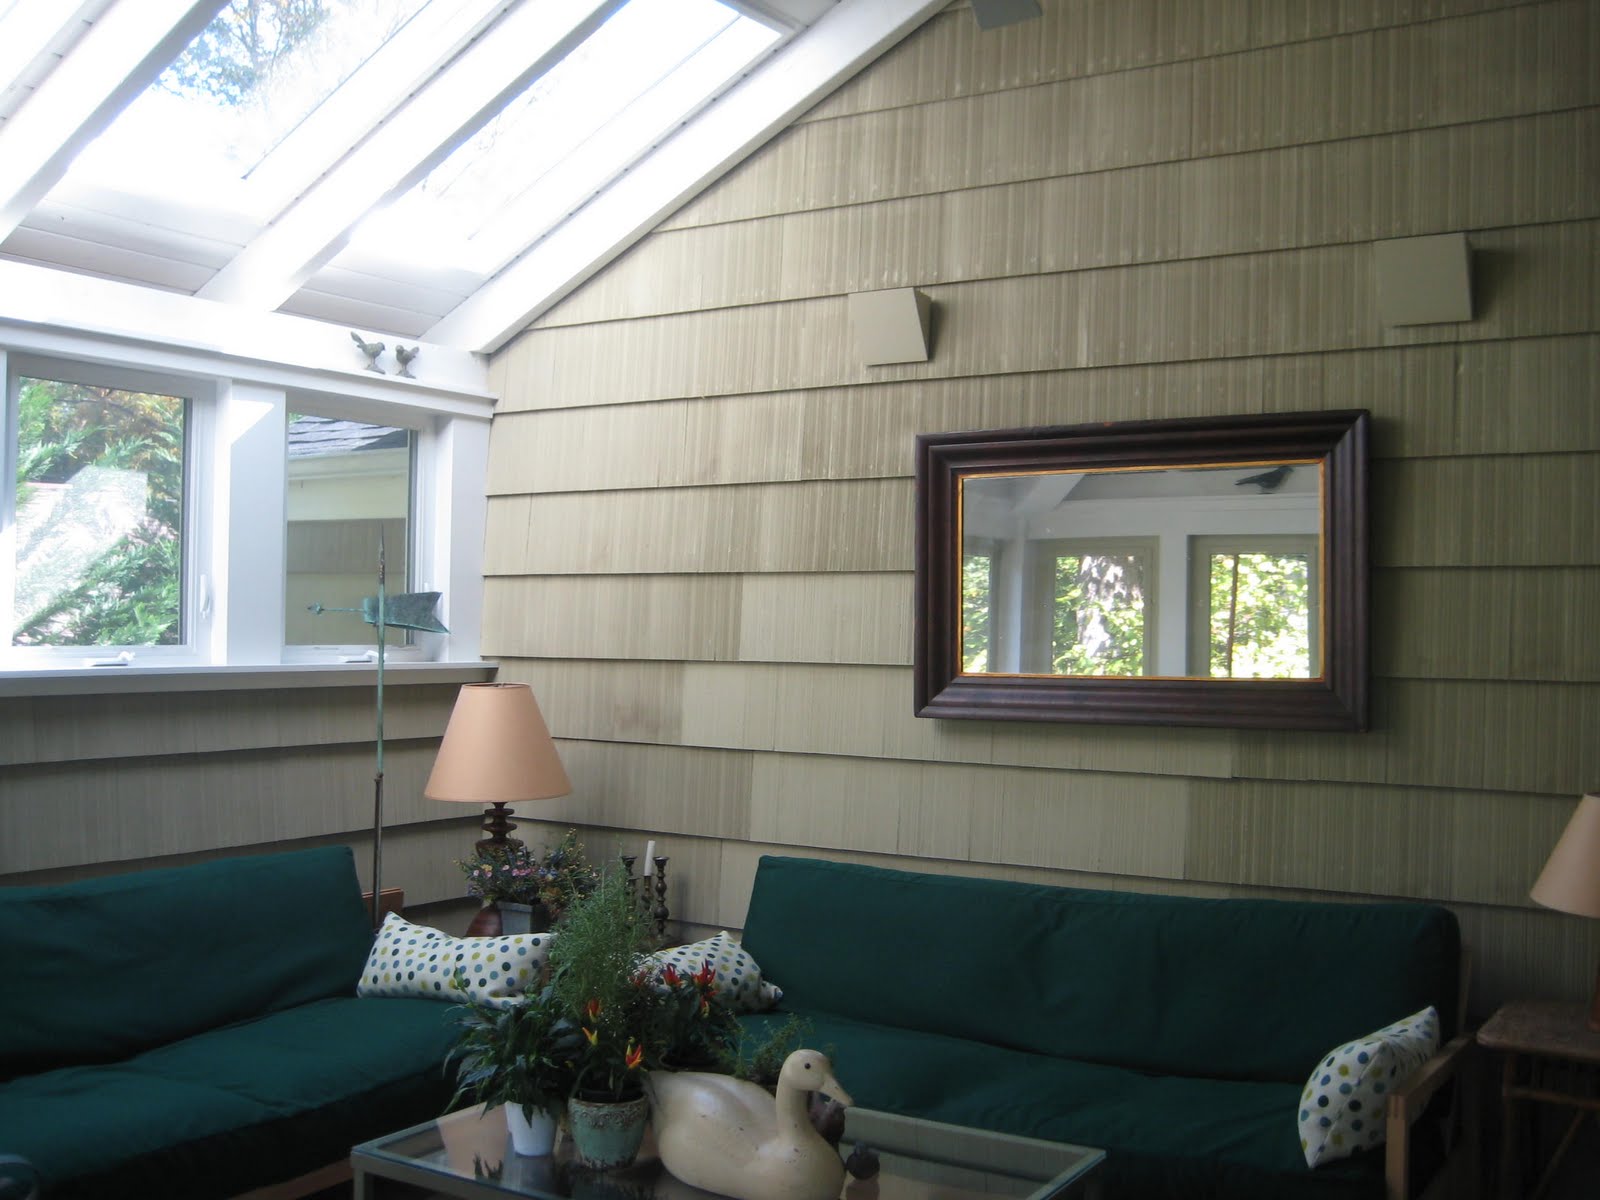 Enjoy the outdoors year-round with sunrooms...